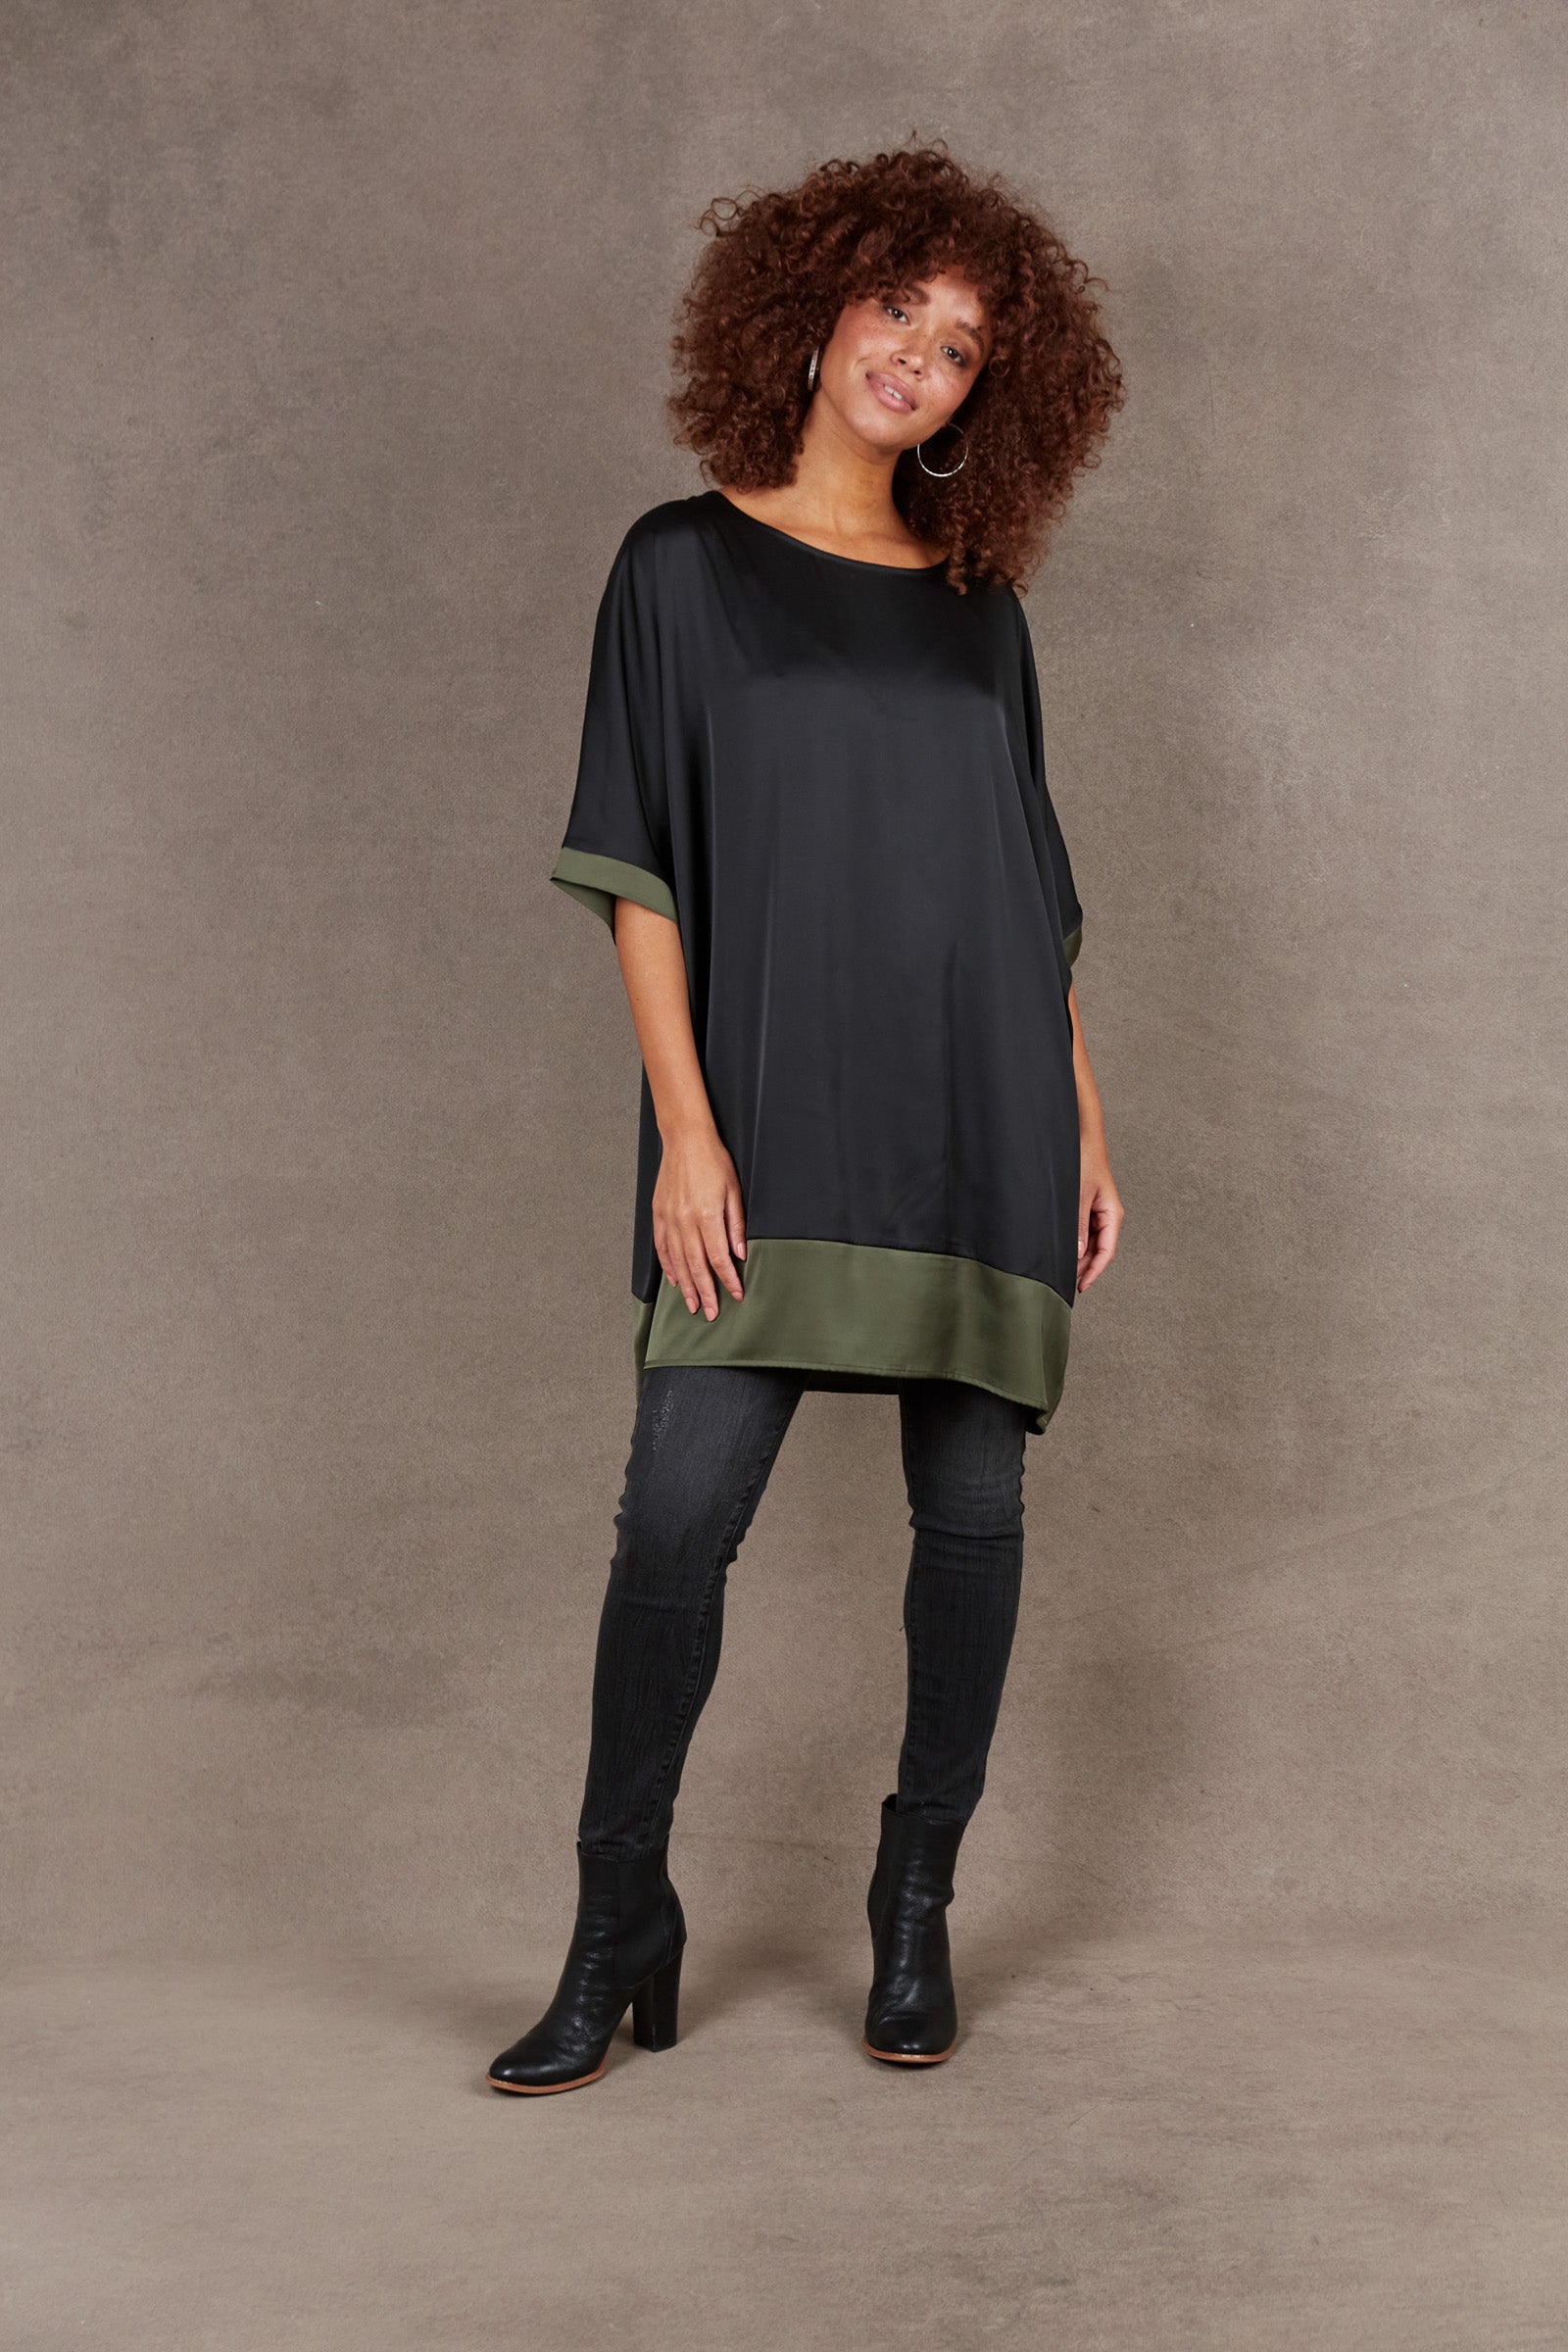 Norse Relax Top - Ebony - eb&ive Clothing - Top One Size Dressy